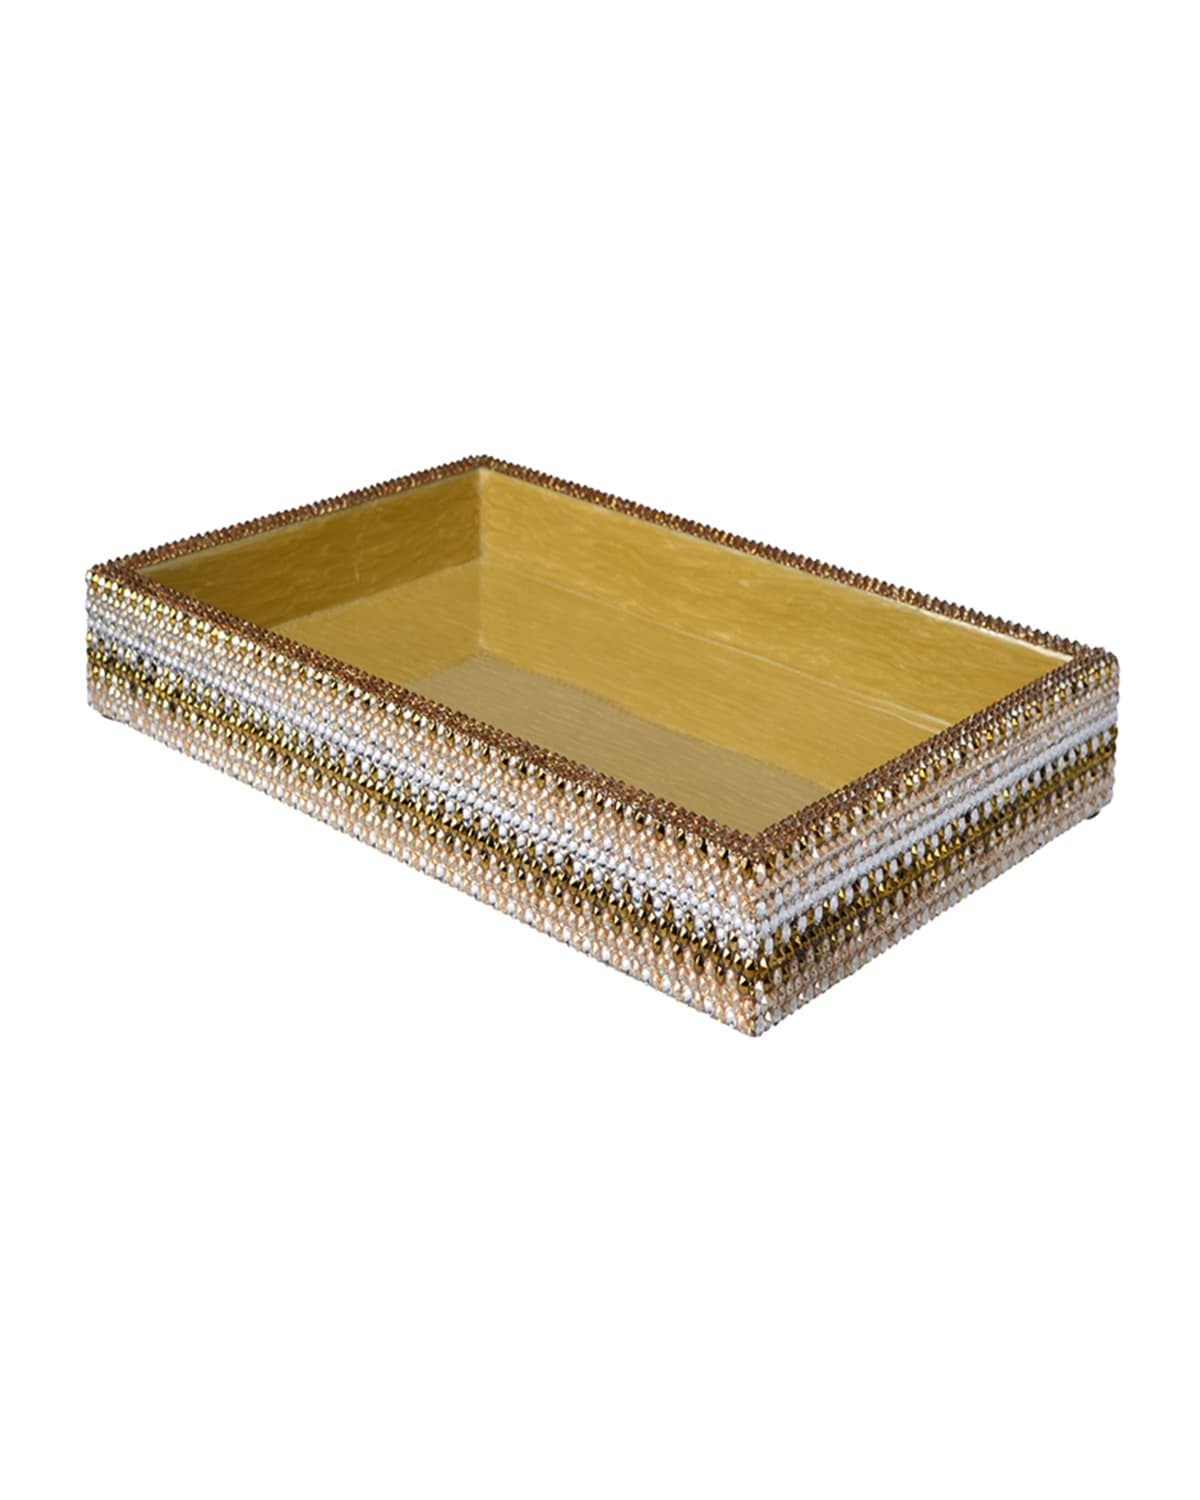 Mike & Ally Biarritz Small Tray With Swarovski Crystals, Gold